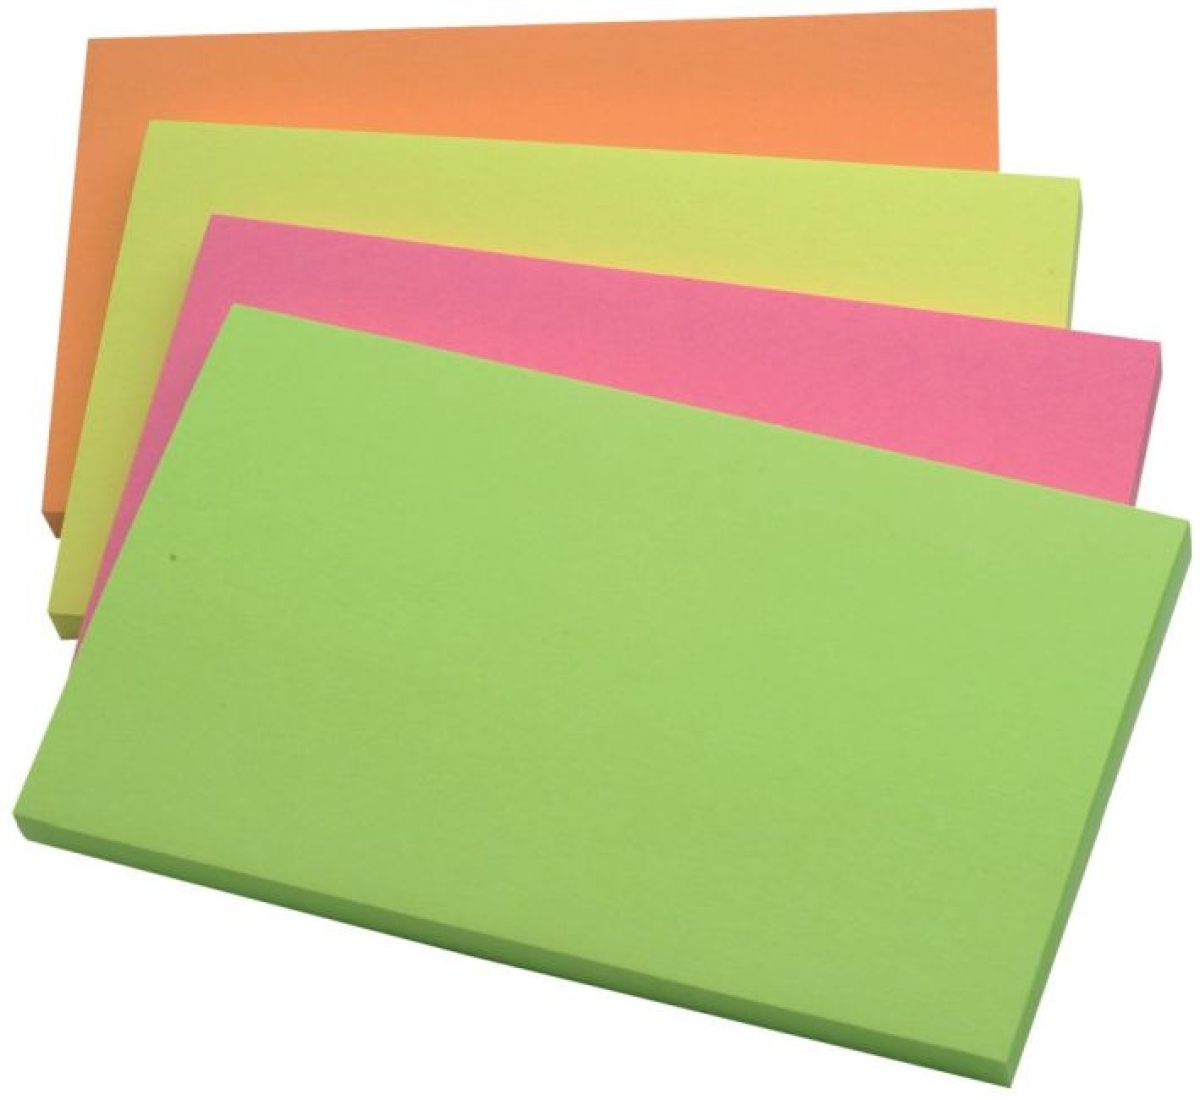 Q-ConnectSticky notepad Rainbow Q-Connect 125x75 12 pieces-Price for 12 pcs.Article-No: 5706002013509